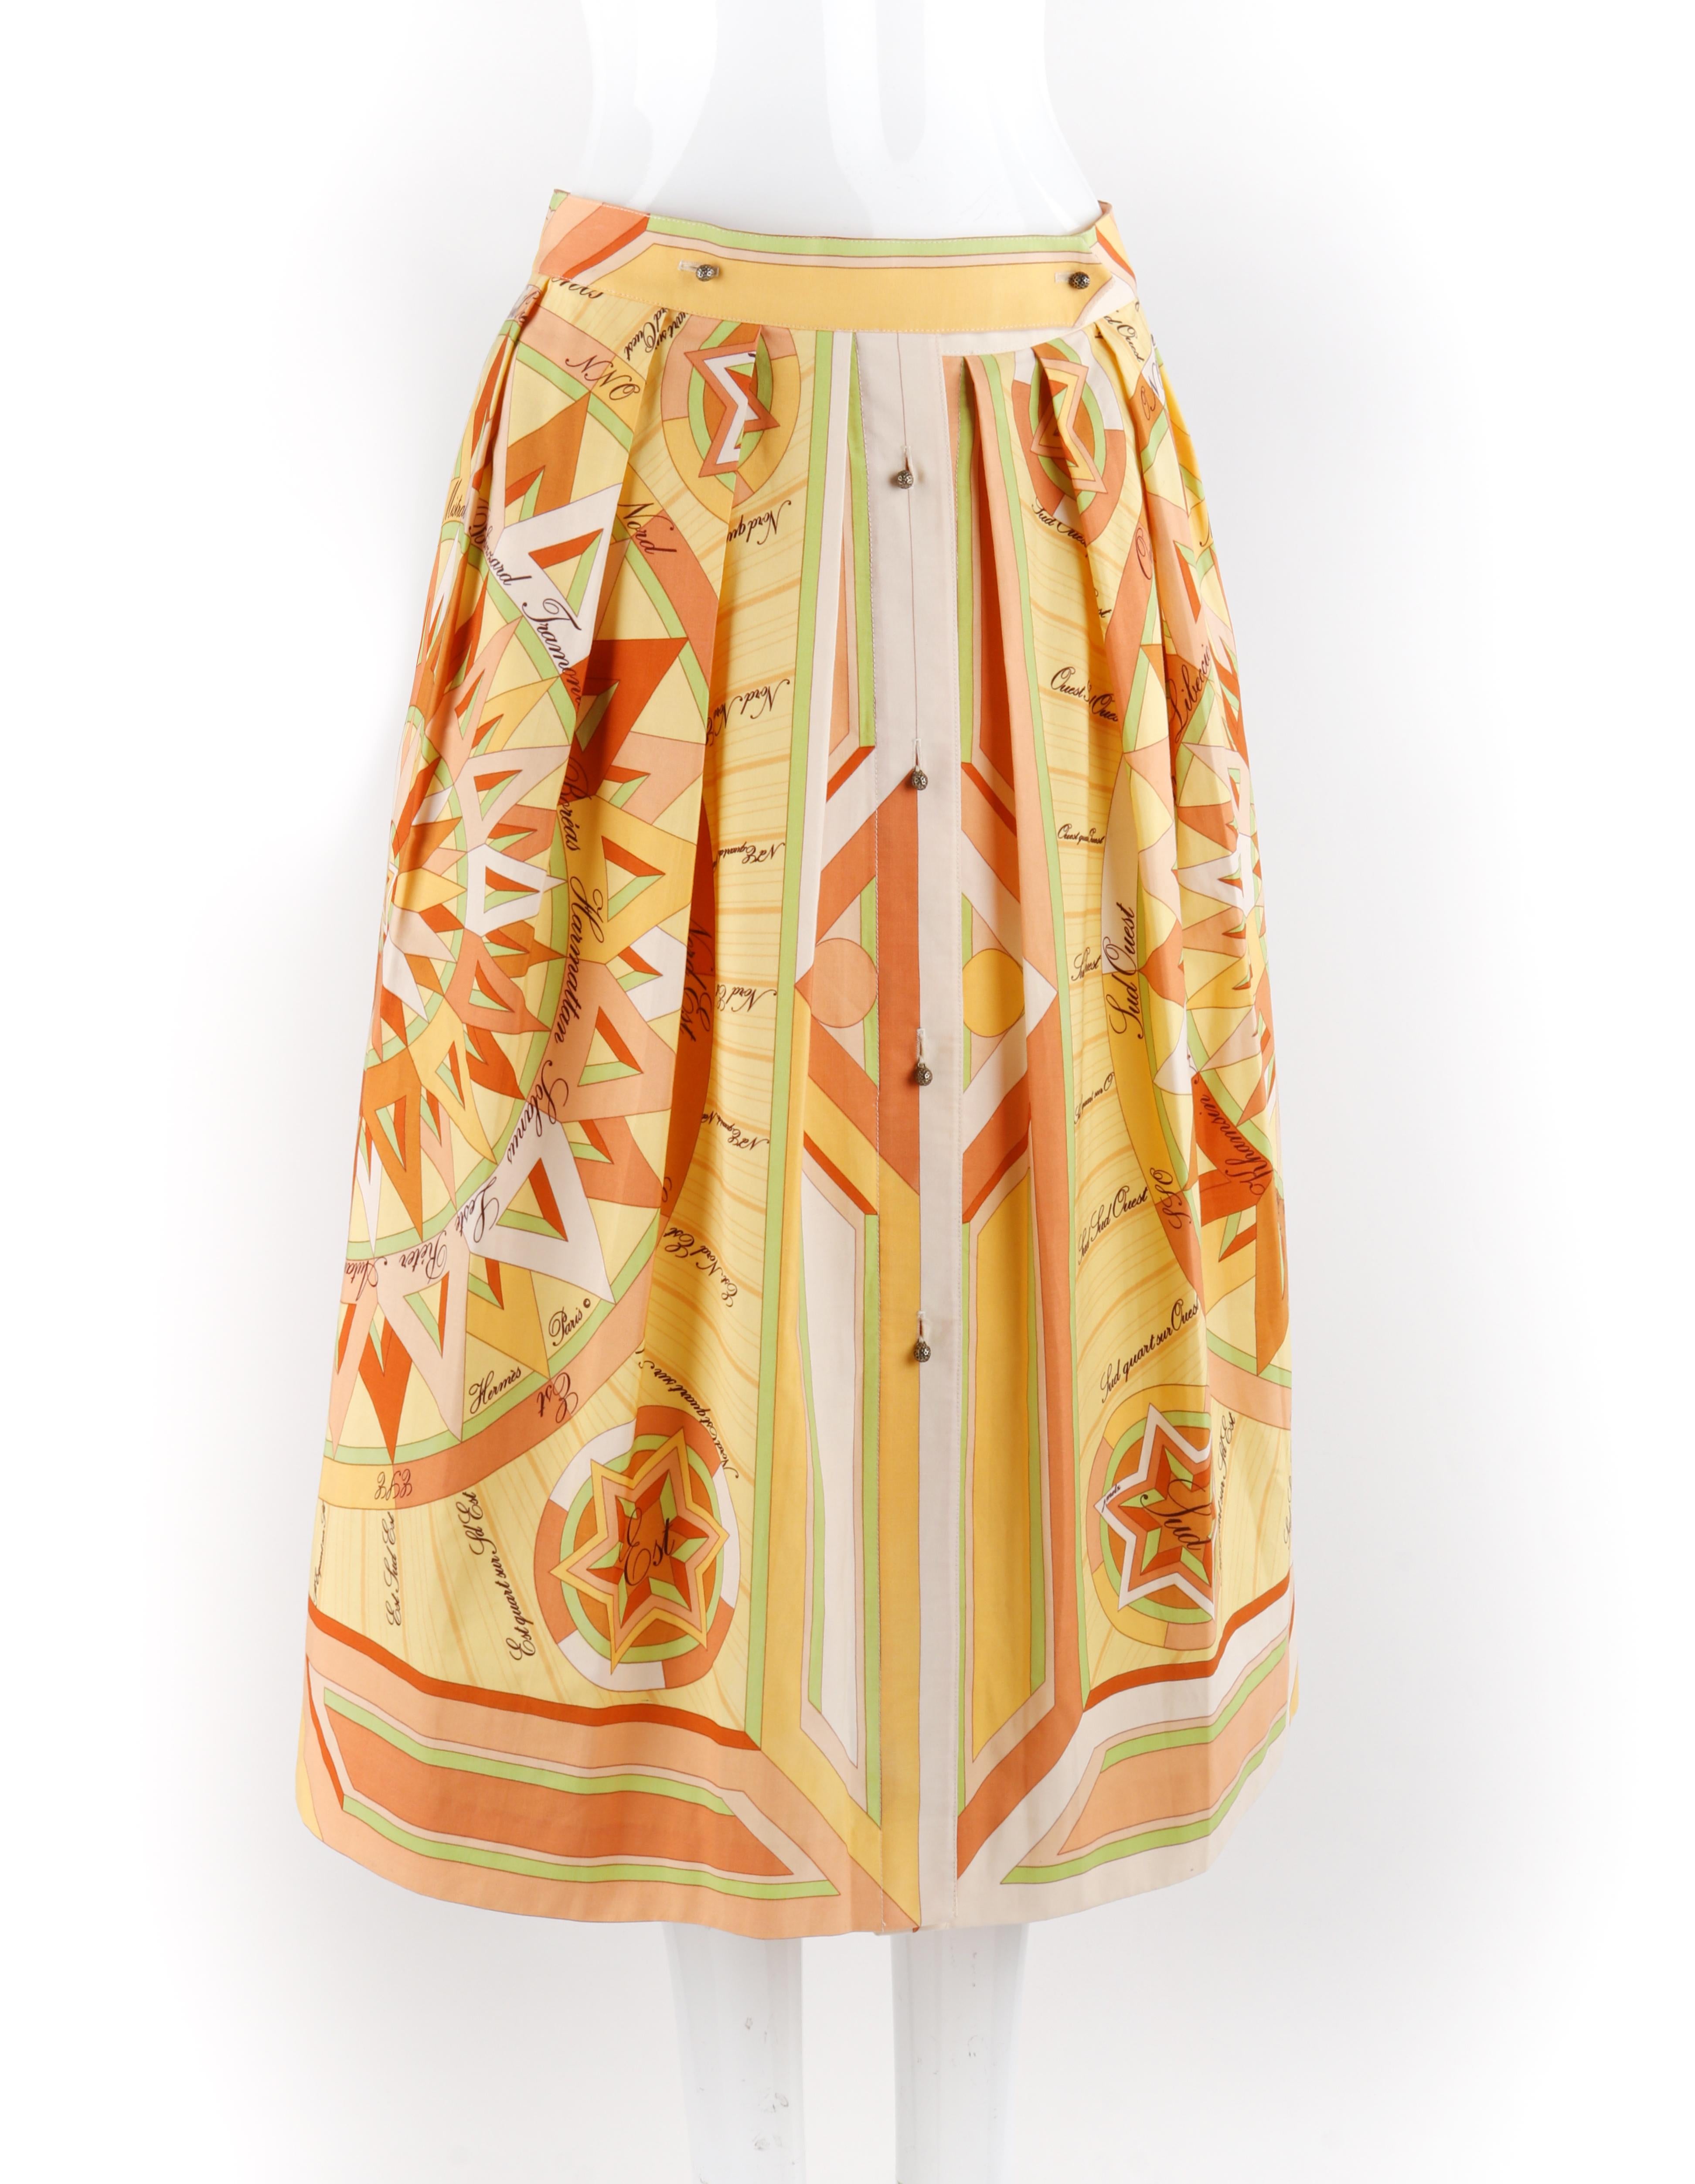 HERMES c.1980's “La Rose des Vents” Yellow Compass Rose Pleated Button-Up Skirt
Circa: 1980’s
Label(s): Hermes Paris
Style: Pleated skirt
Color(s): Shades of yellow, orange, beige, white, peach, green, brown
Lined: No
Marked Fabric Content: “100%